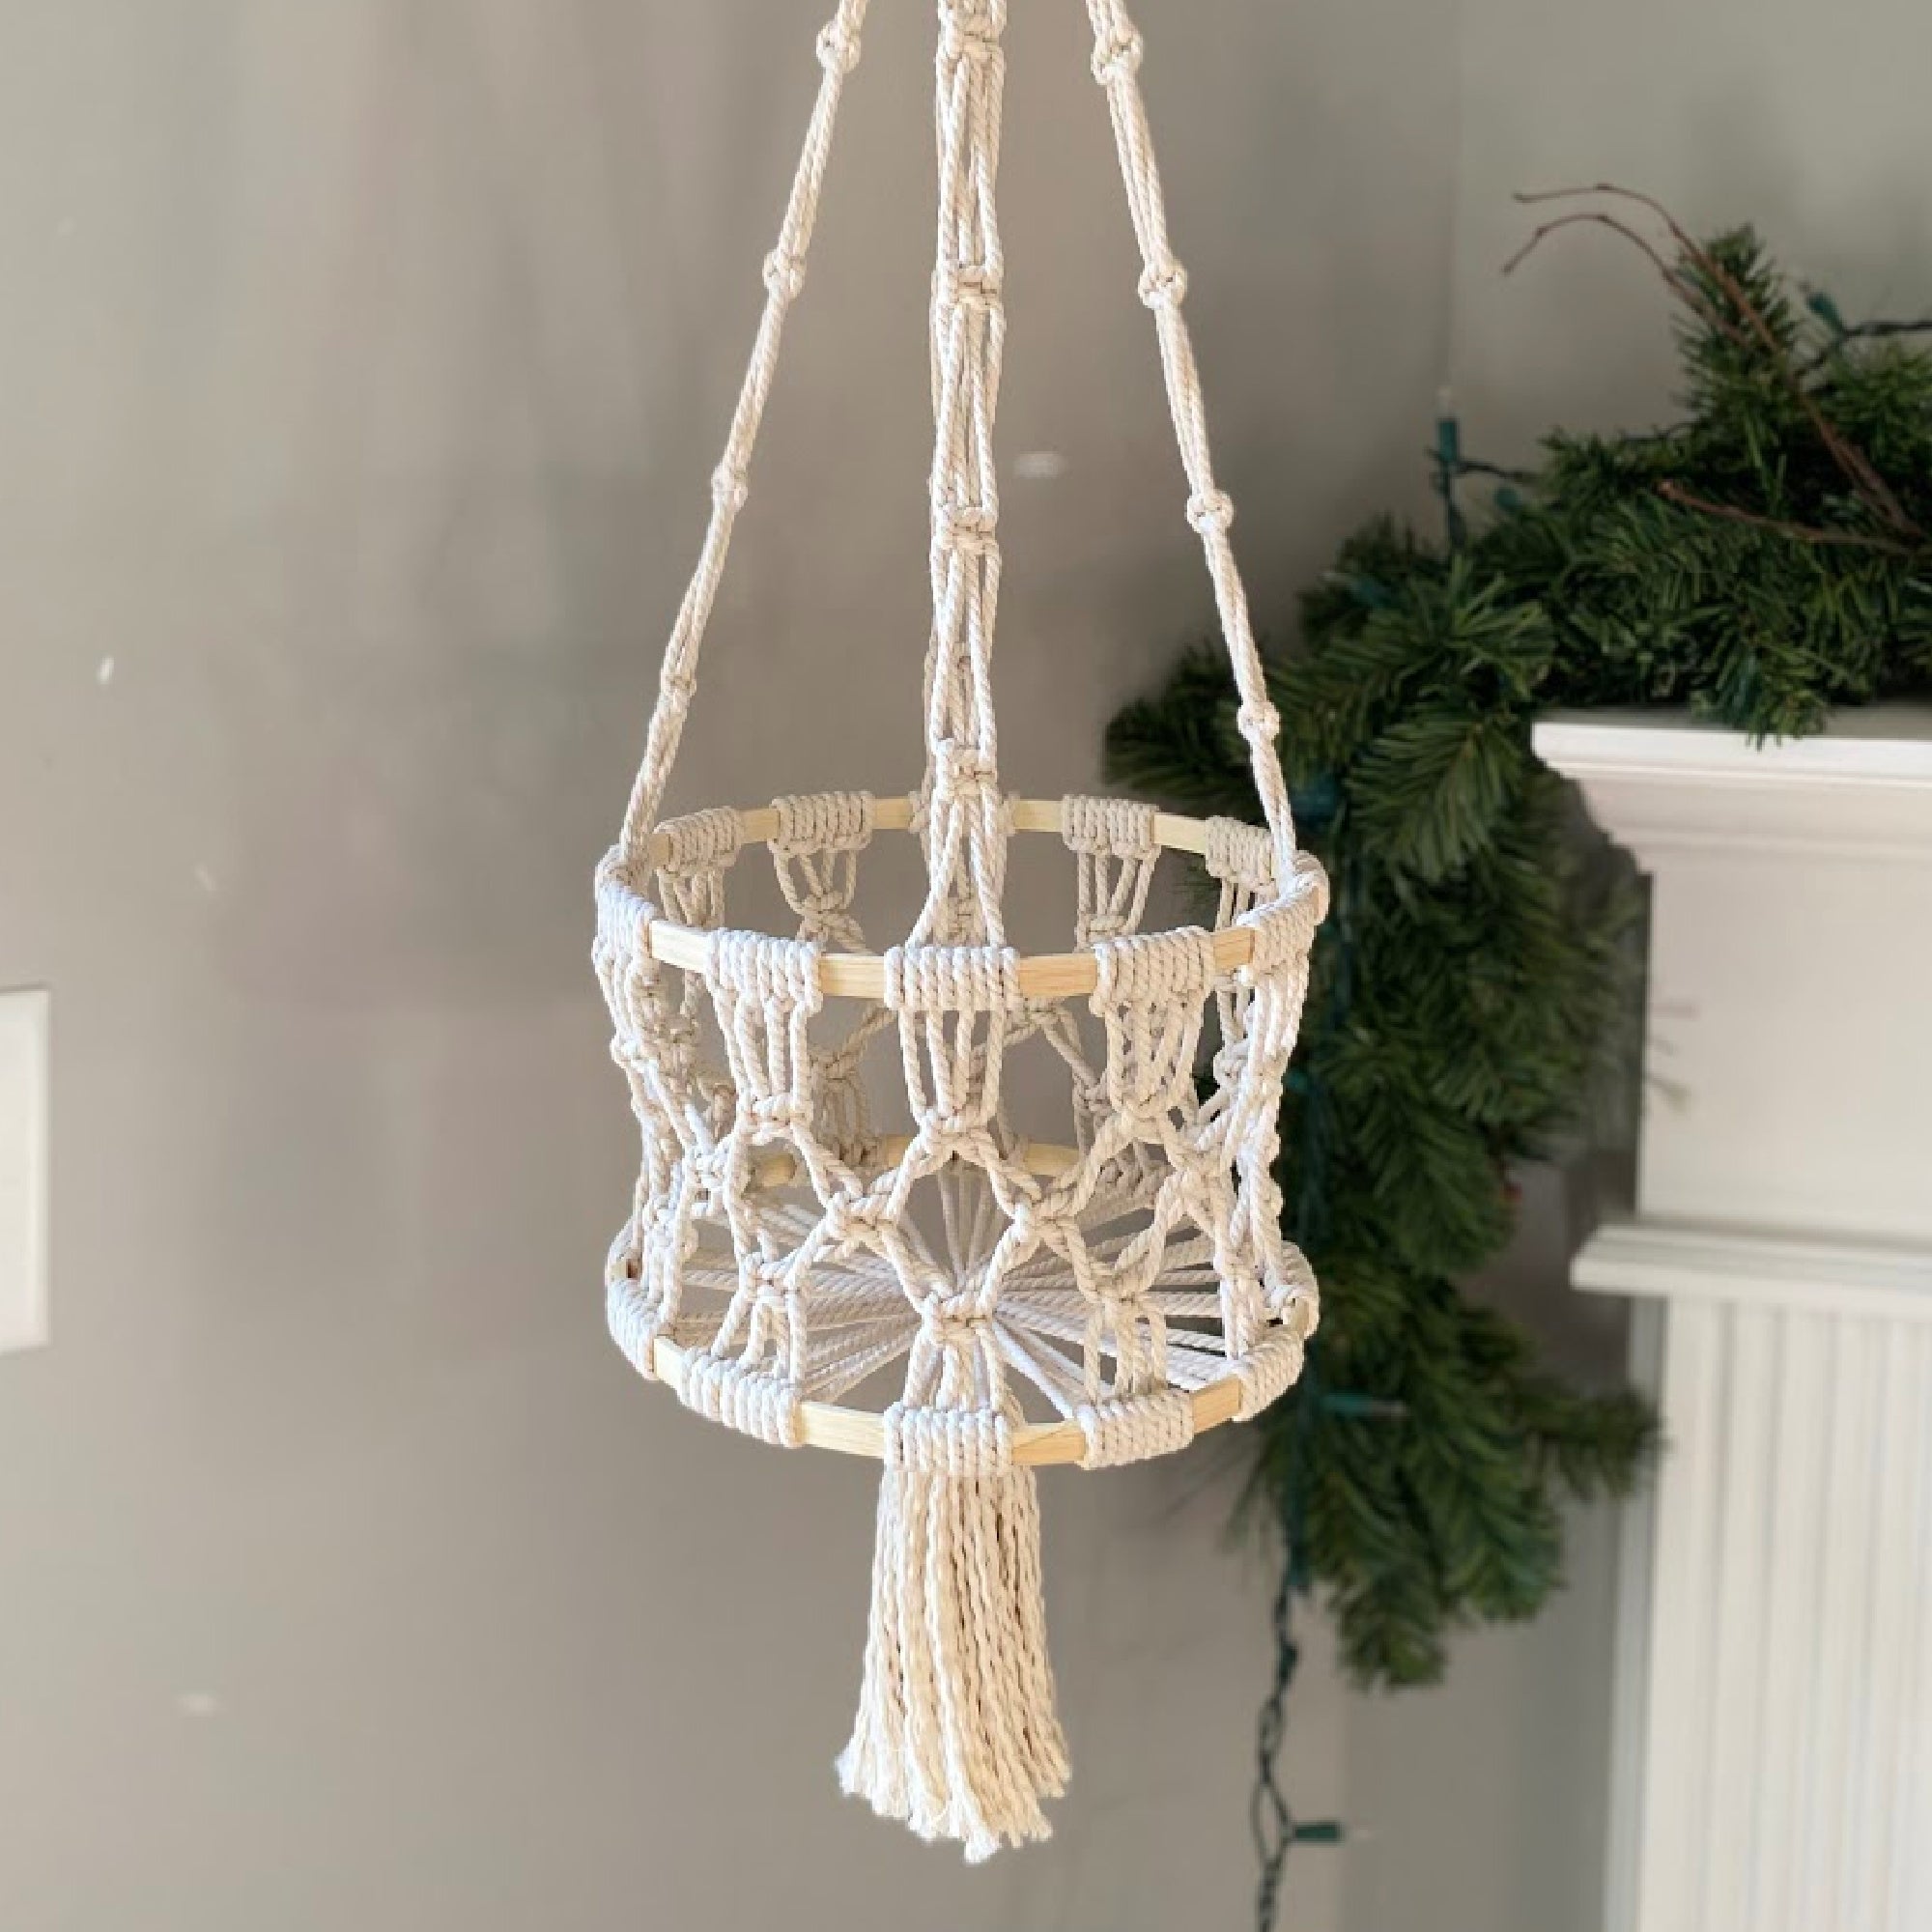 finished macrame hanging basket in front of a gray wall and greenery in the background